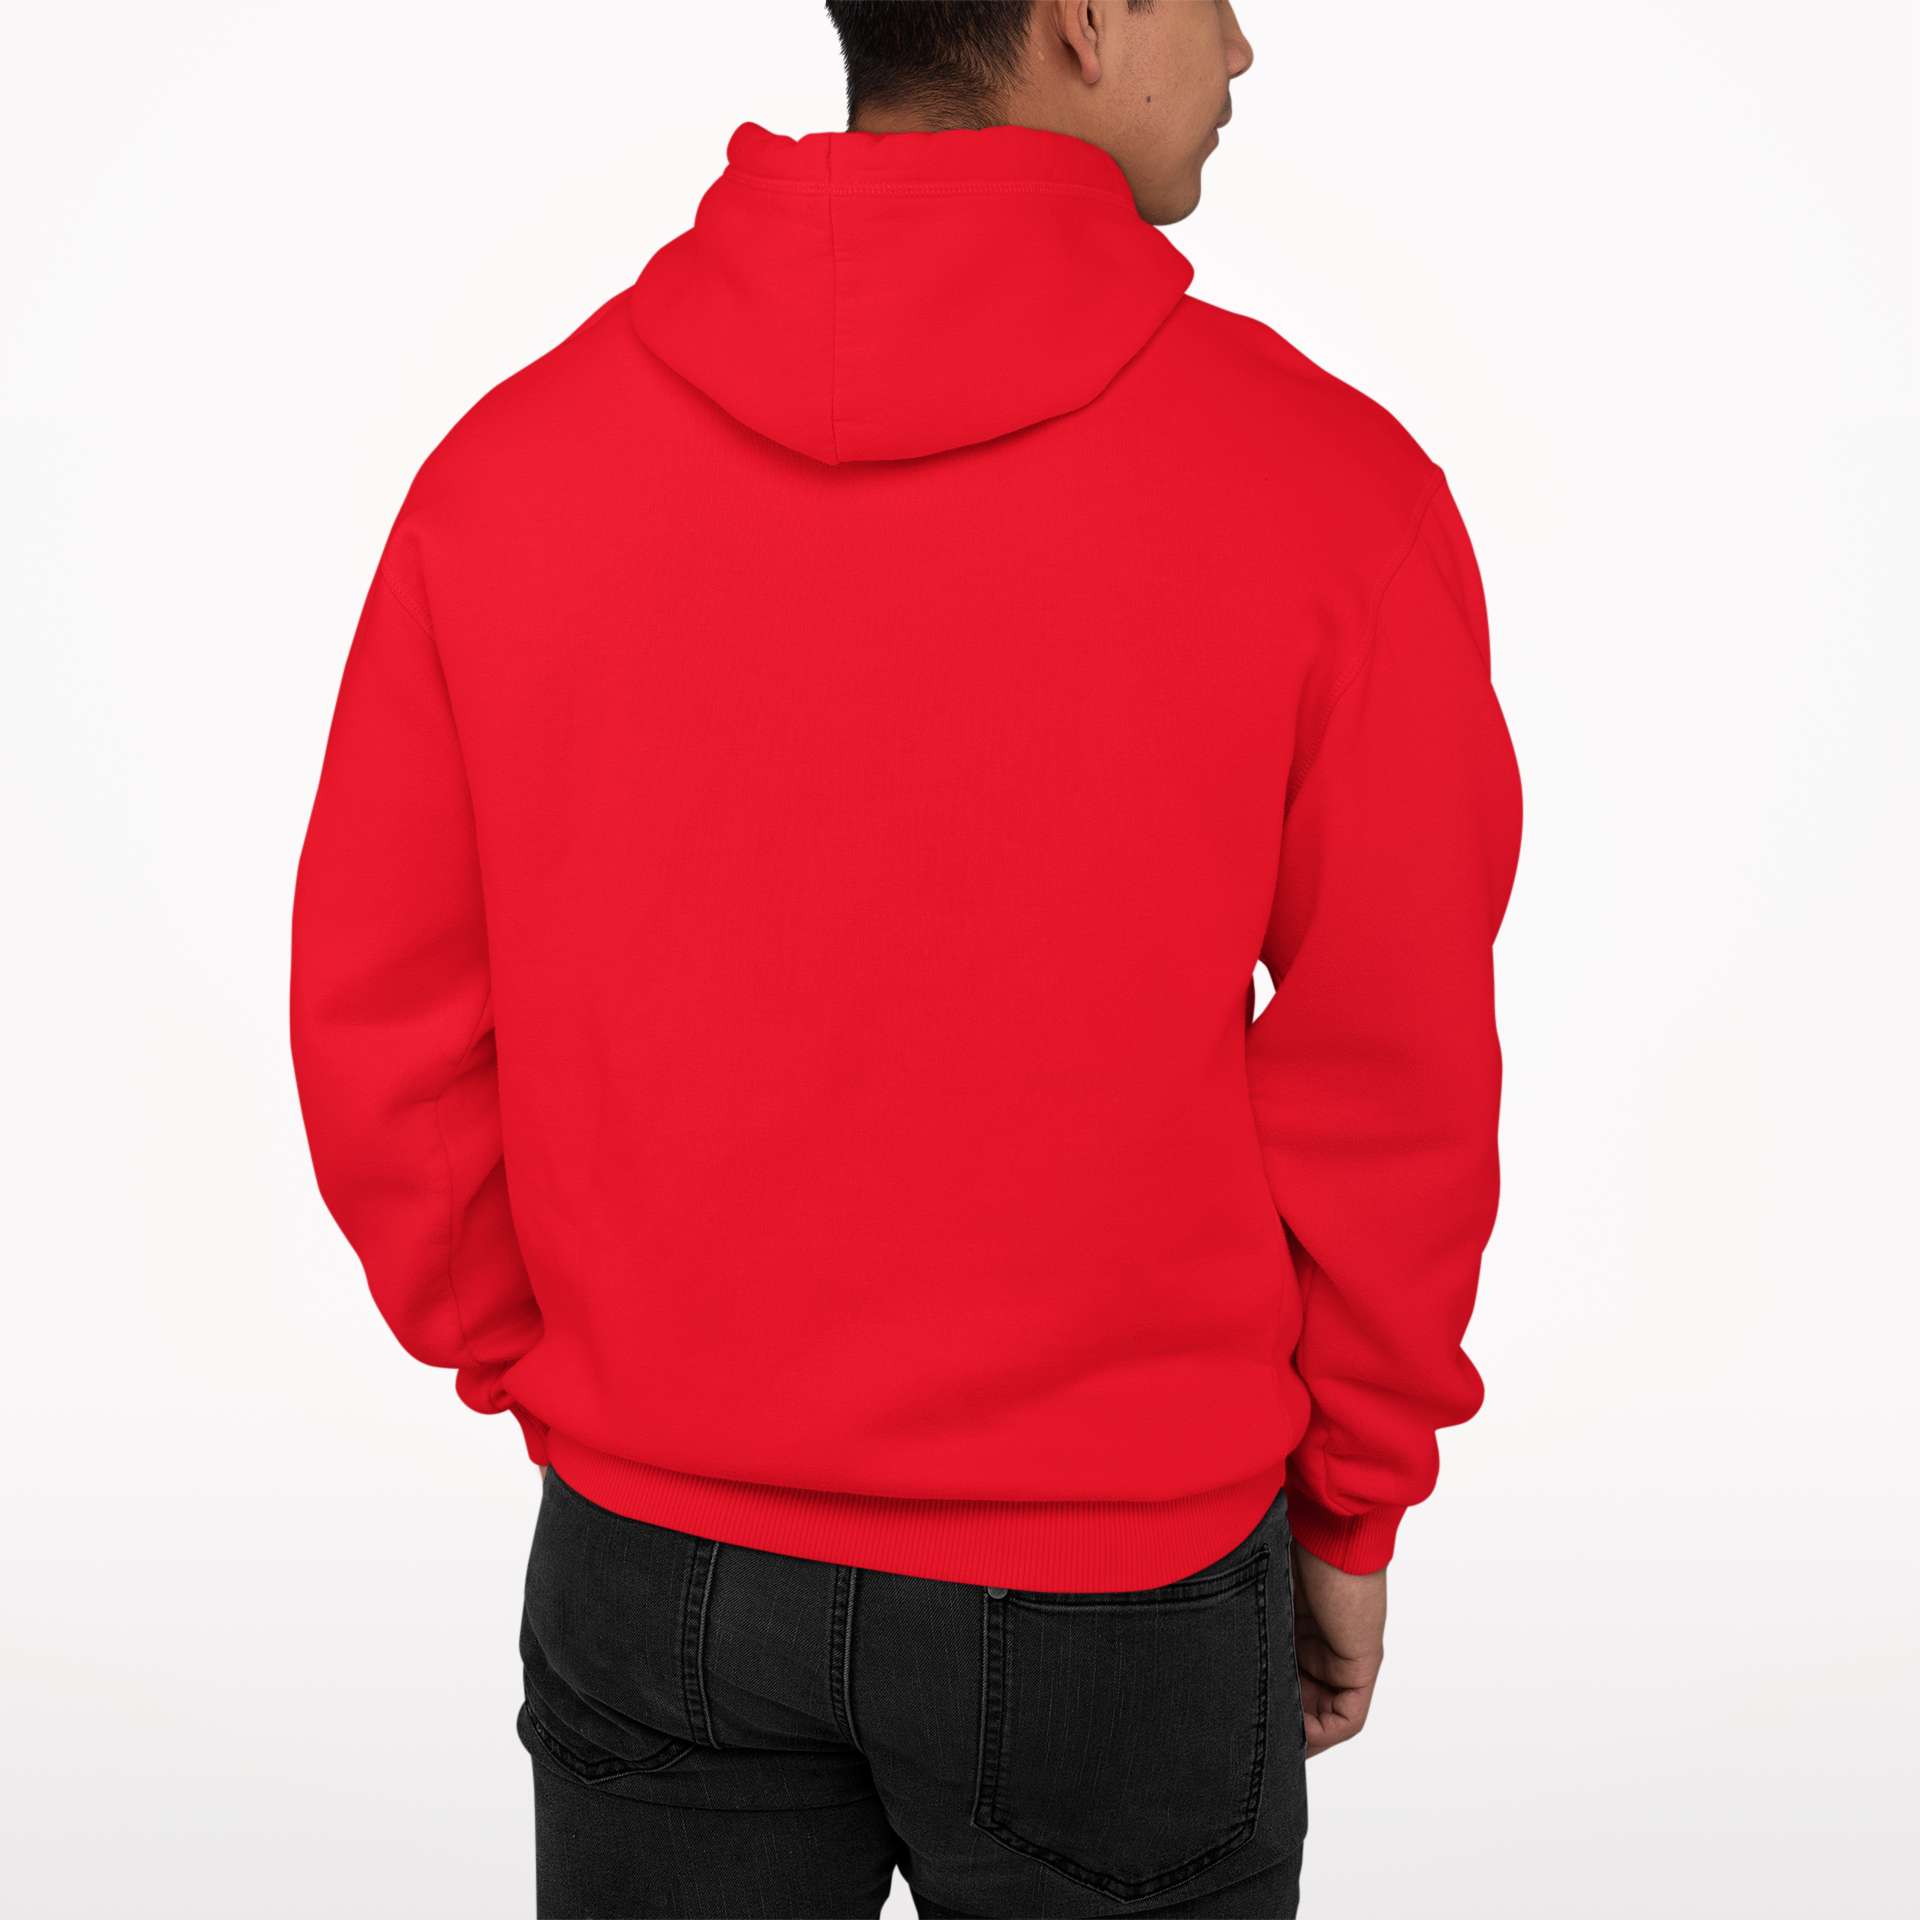 BOOSTED ENGINES ''BRAND LOGO'' MEN'S HOODIE